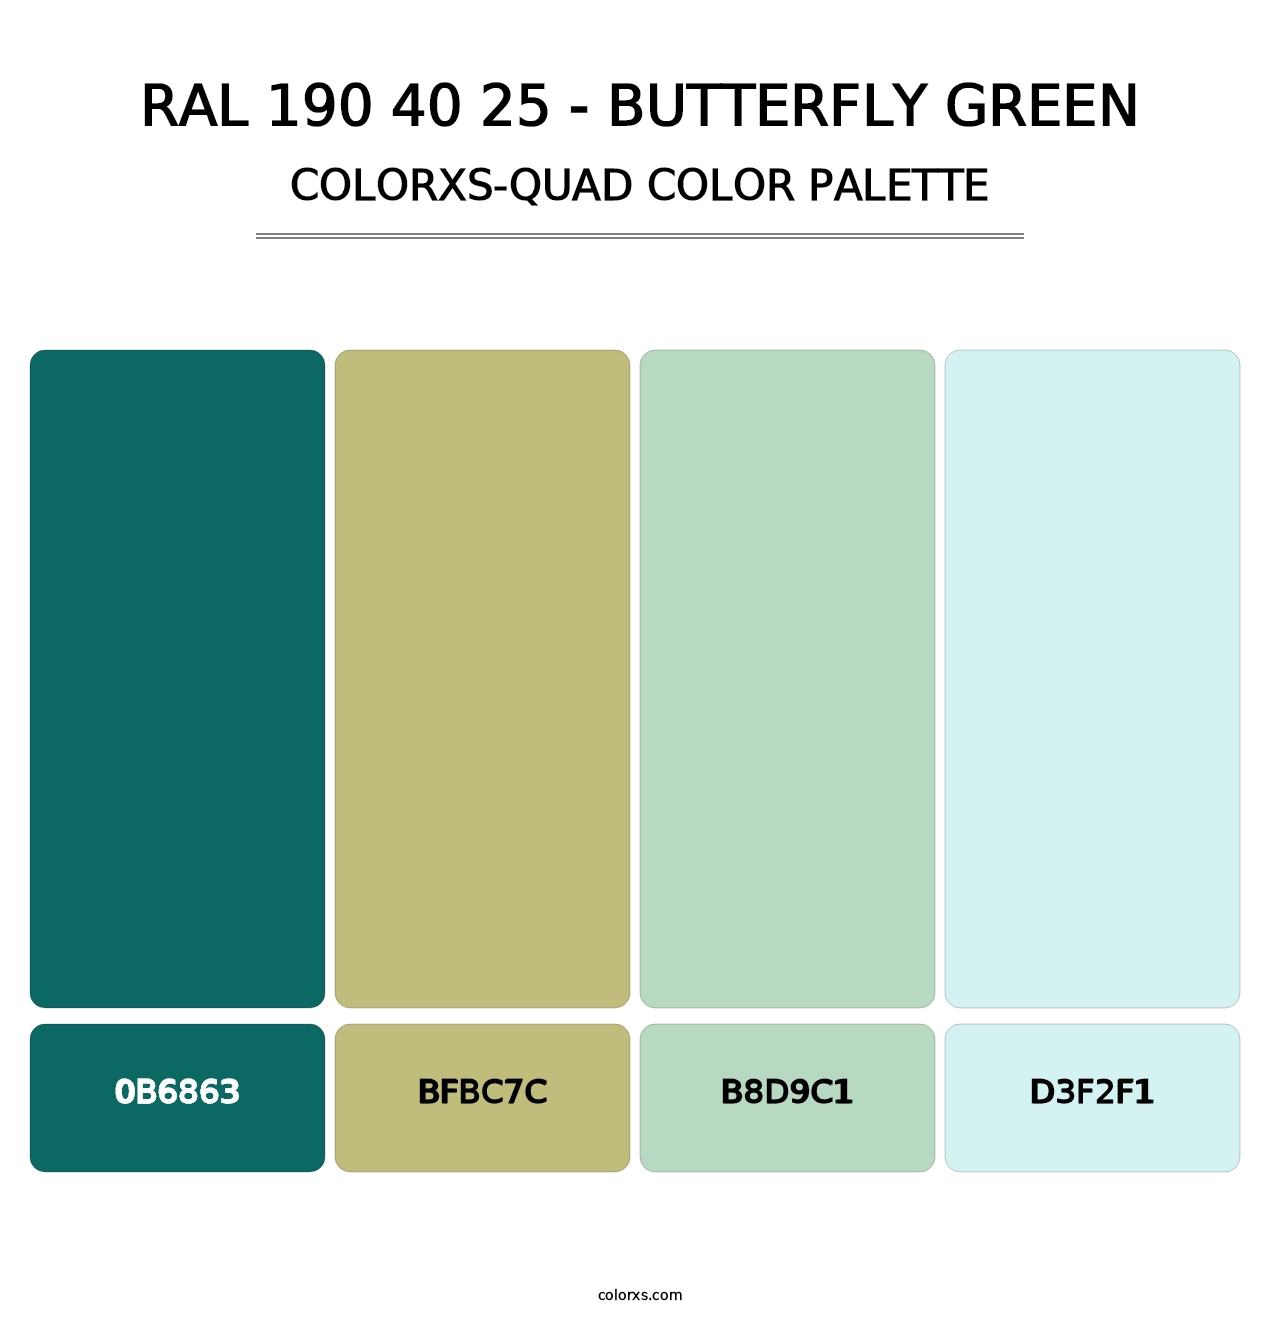 RAL 190 40 25 - Butterfly Green - Colorxs Quad Palette